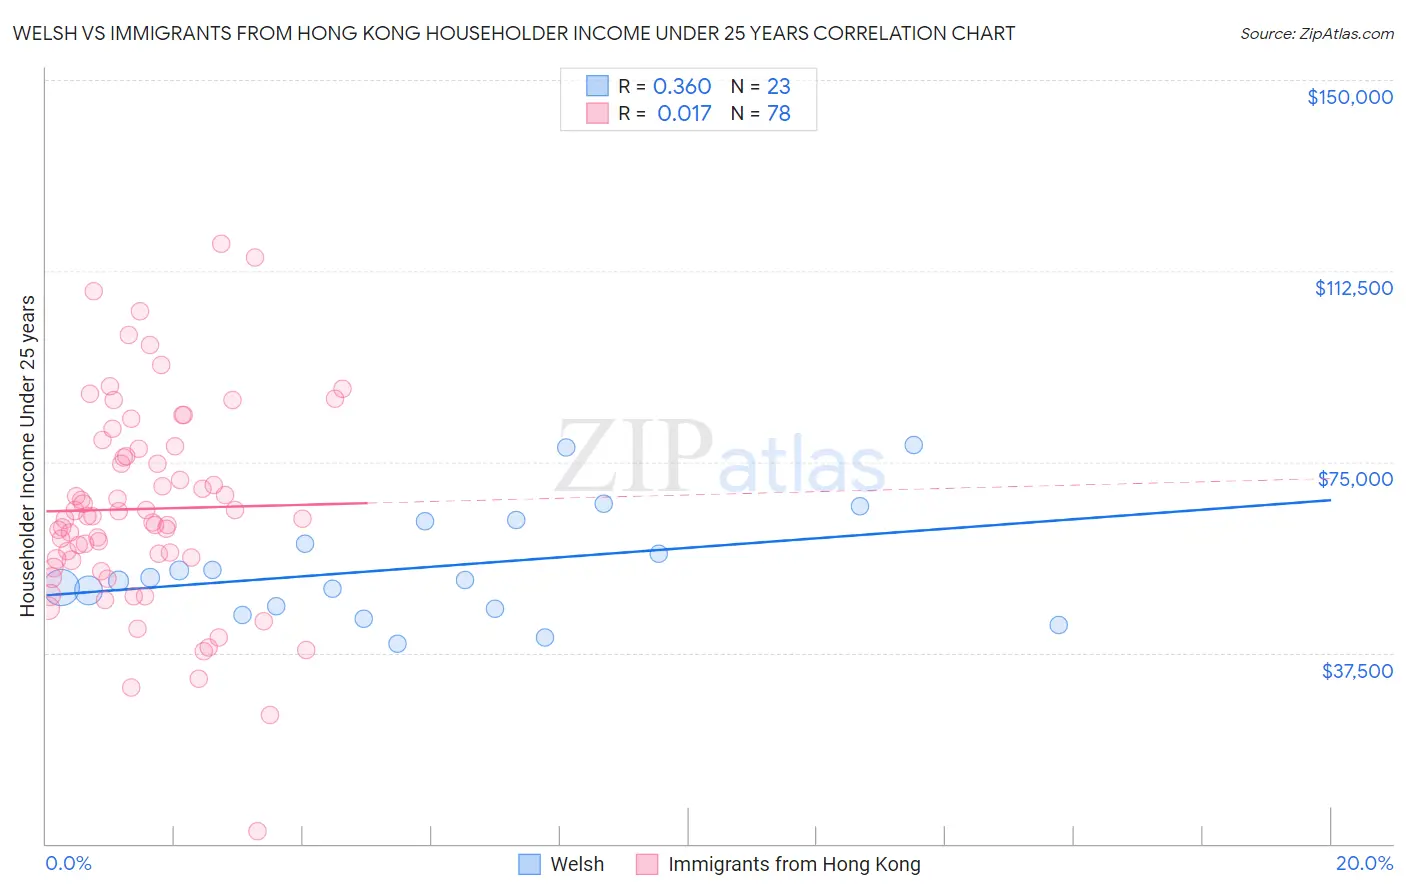 Welsh vs Immigrants from Hong Kong Householder Income Under 25 years